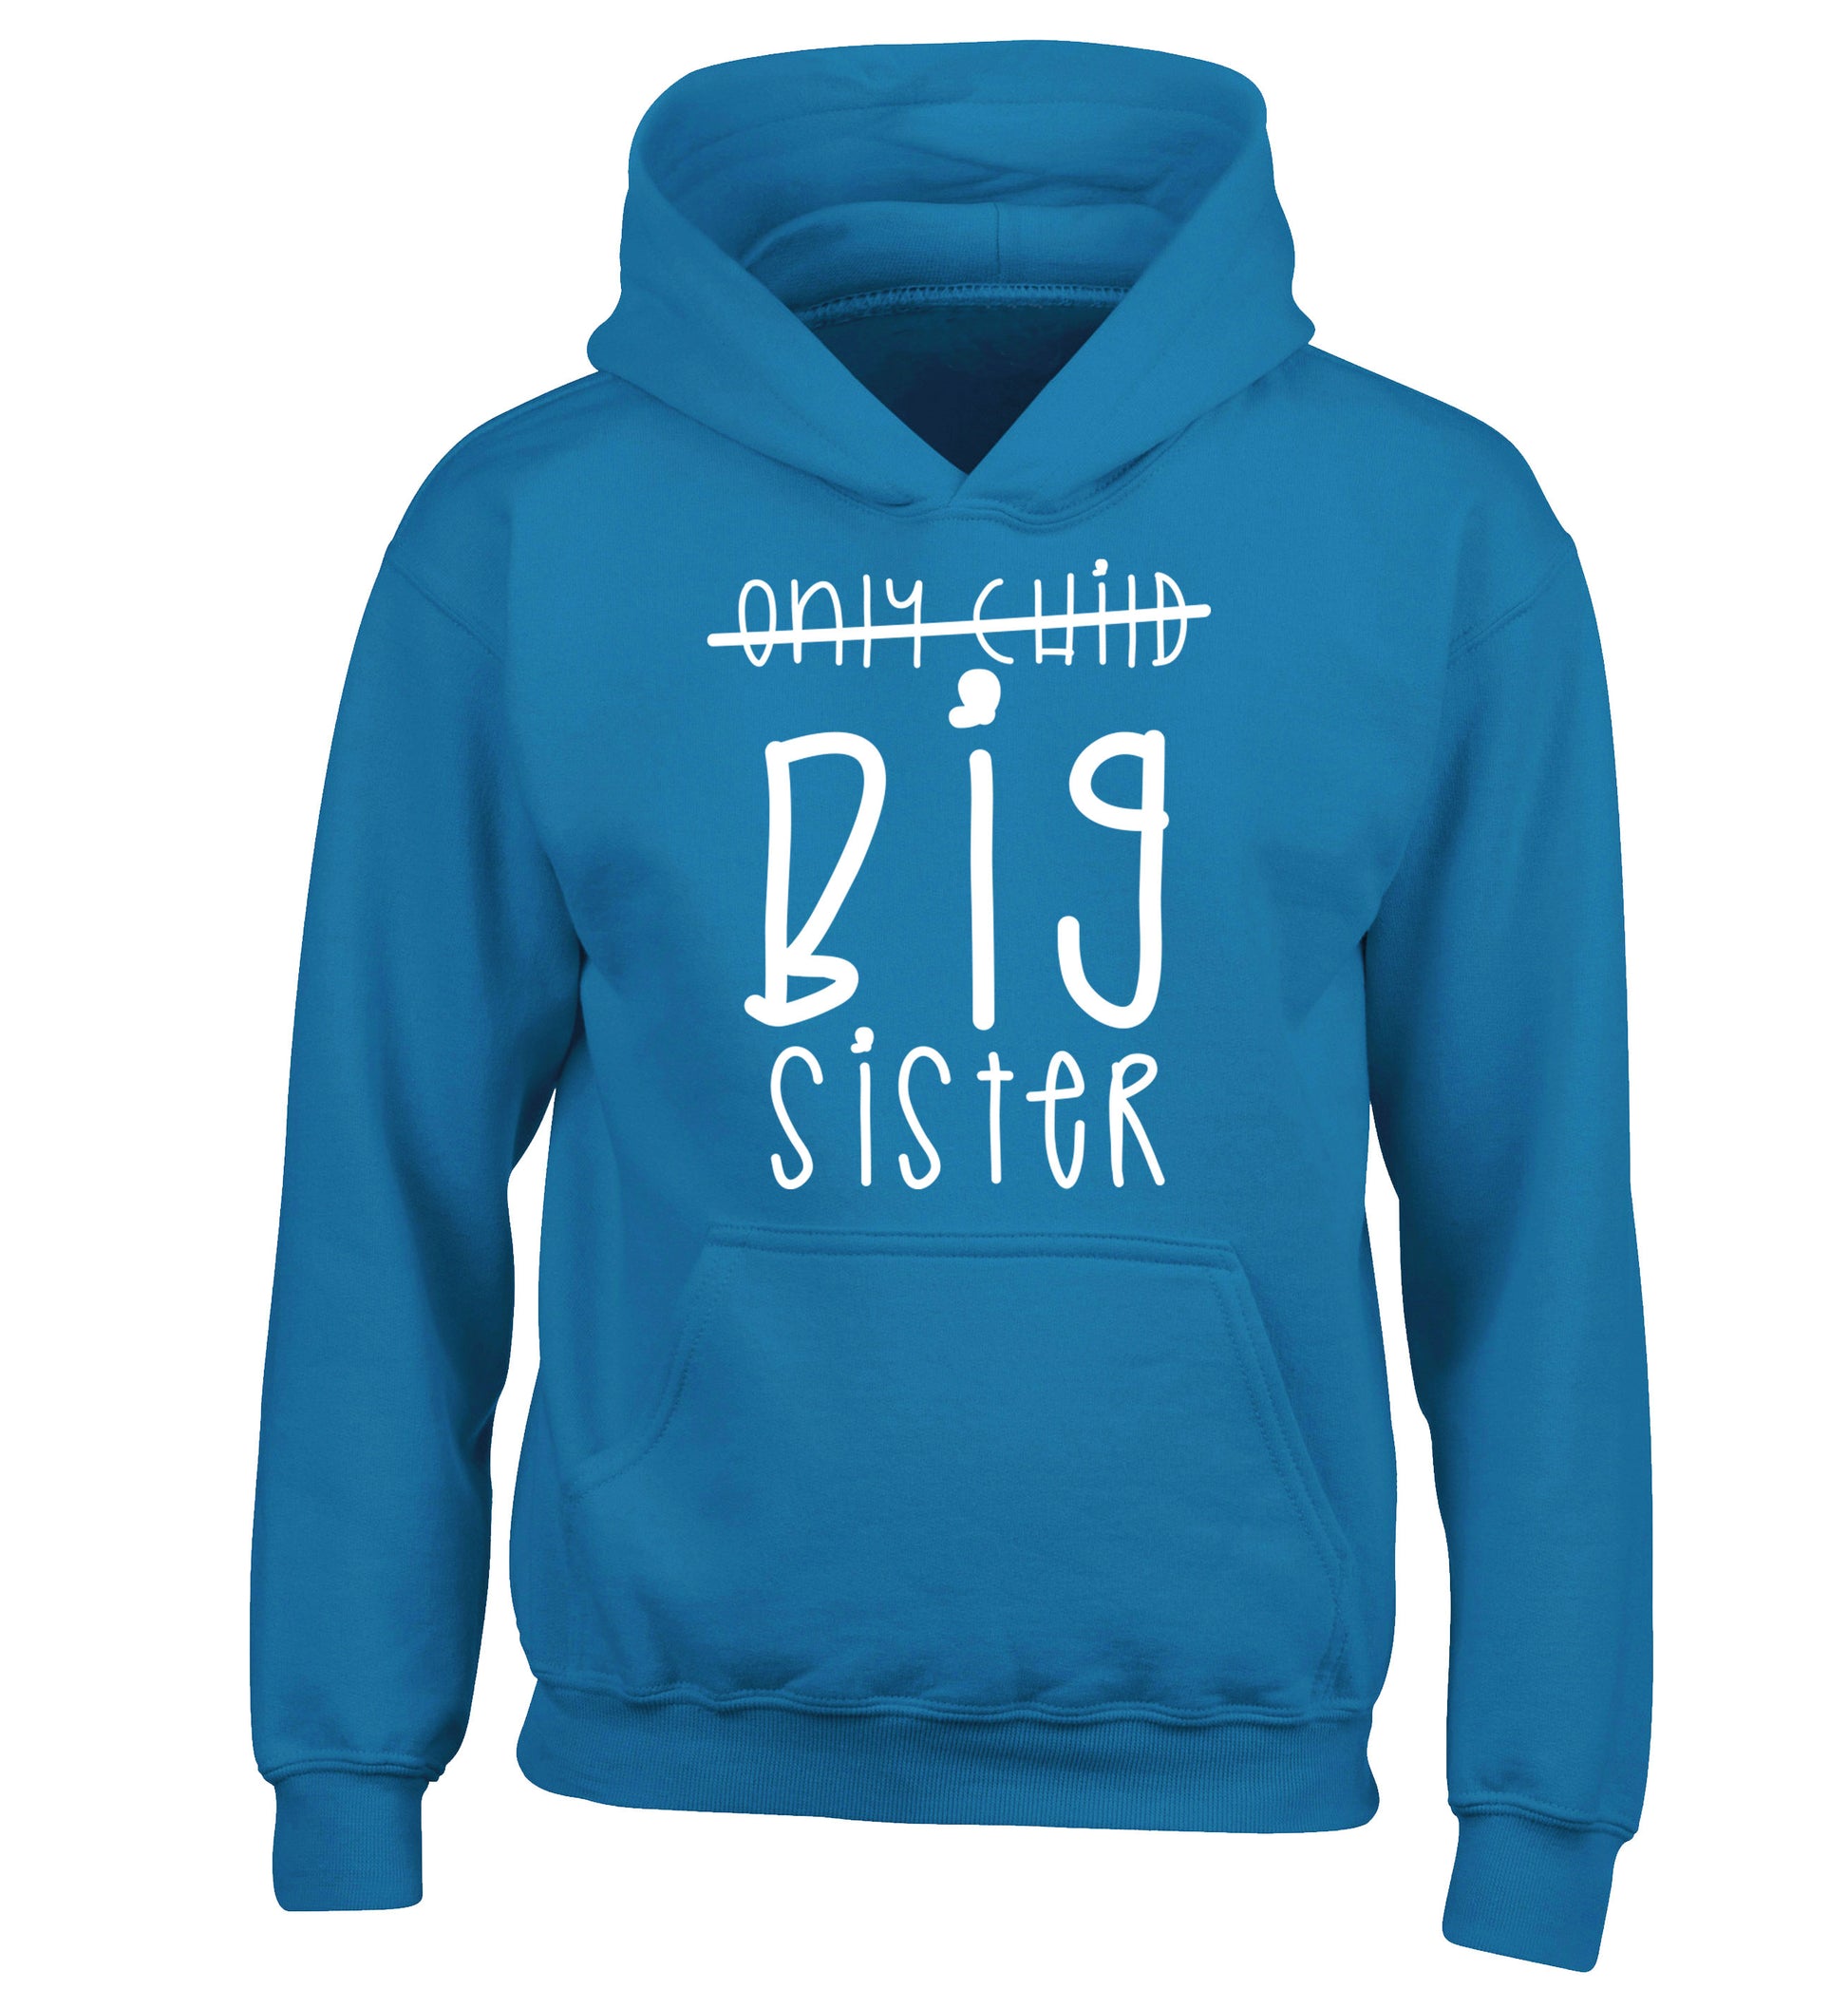 Only child big sister children's blue hoodie 12-14 Years